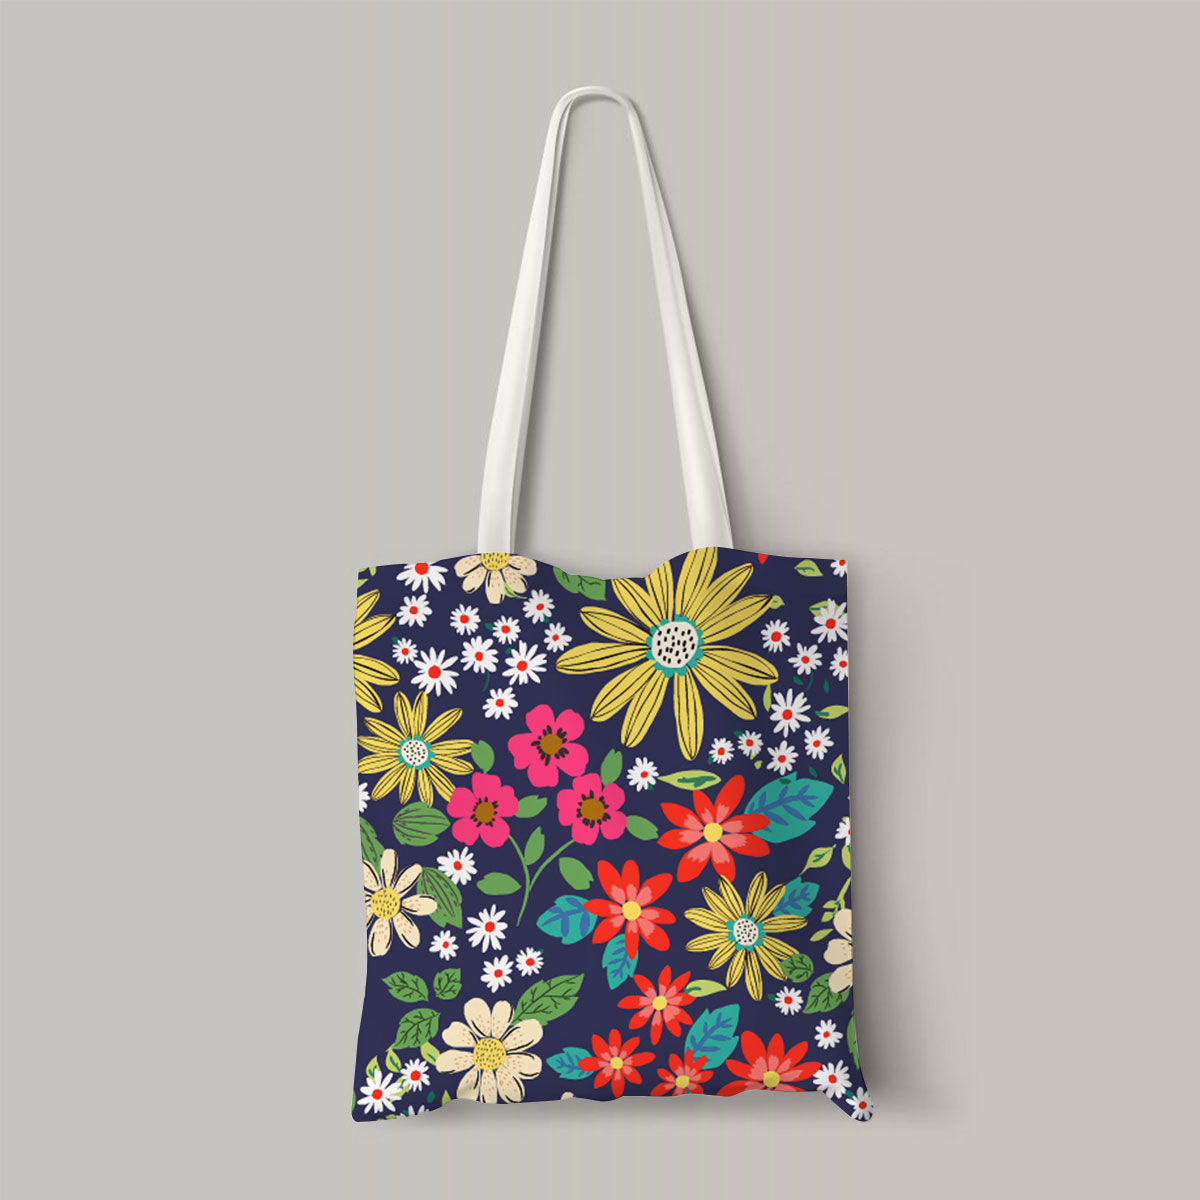 Colorful Daisy Totebag